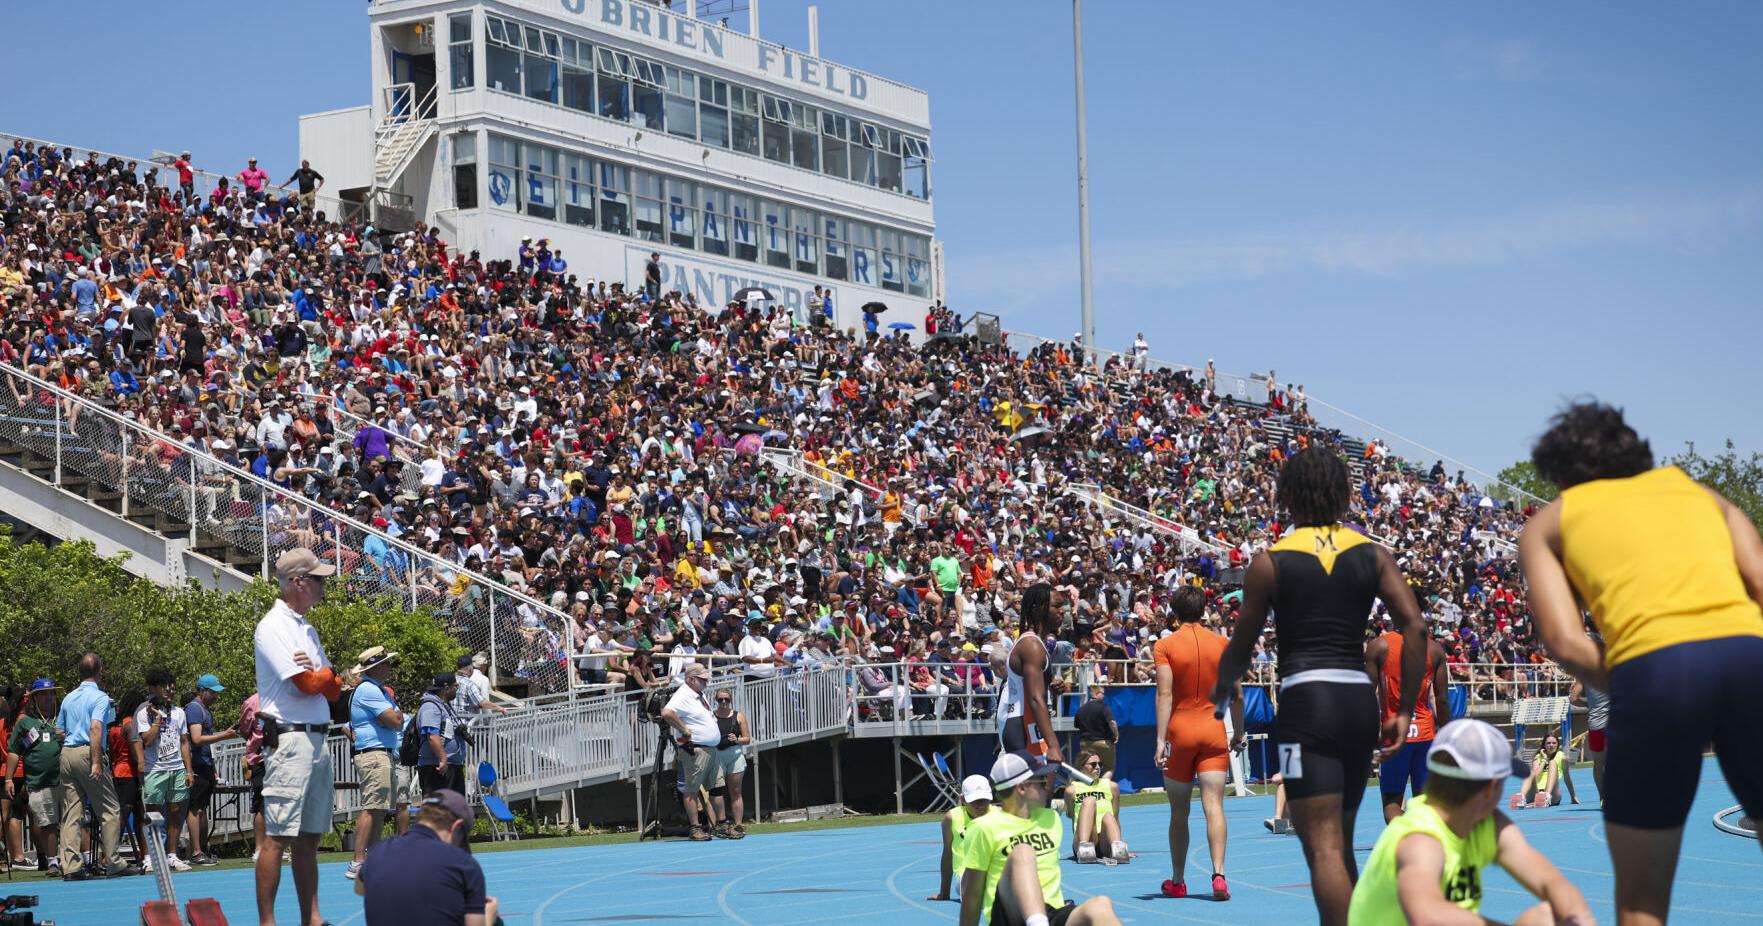 Shelbyville second, St. Teresa and Mount Zion sixth at IHSA Boys State Track Meet